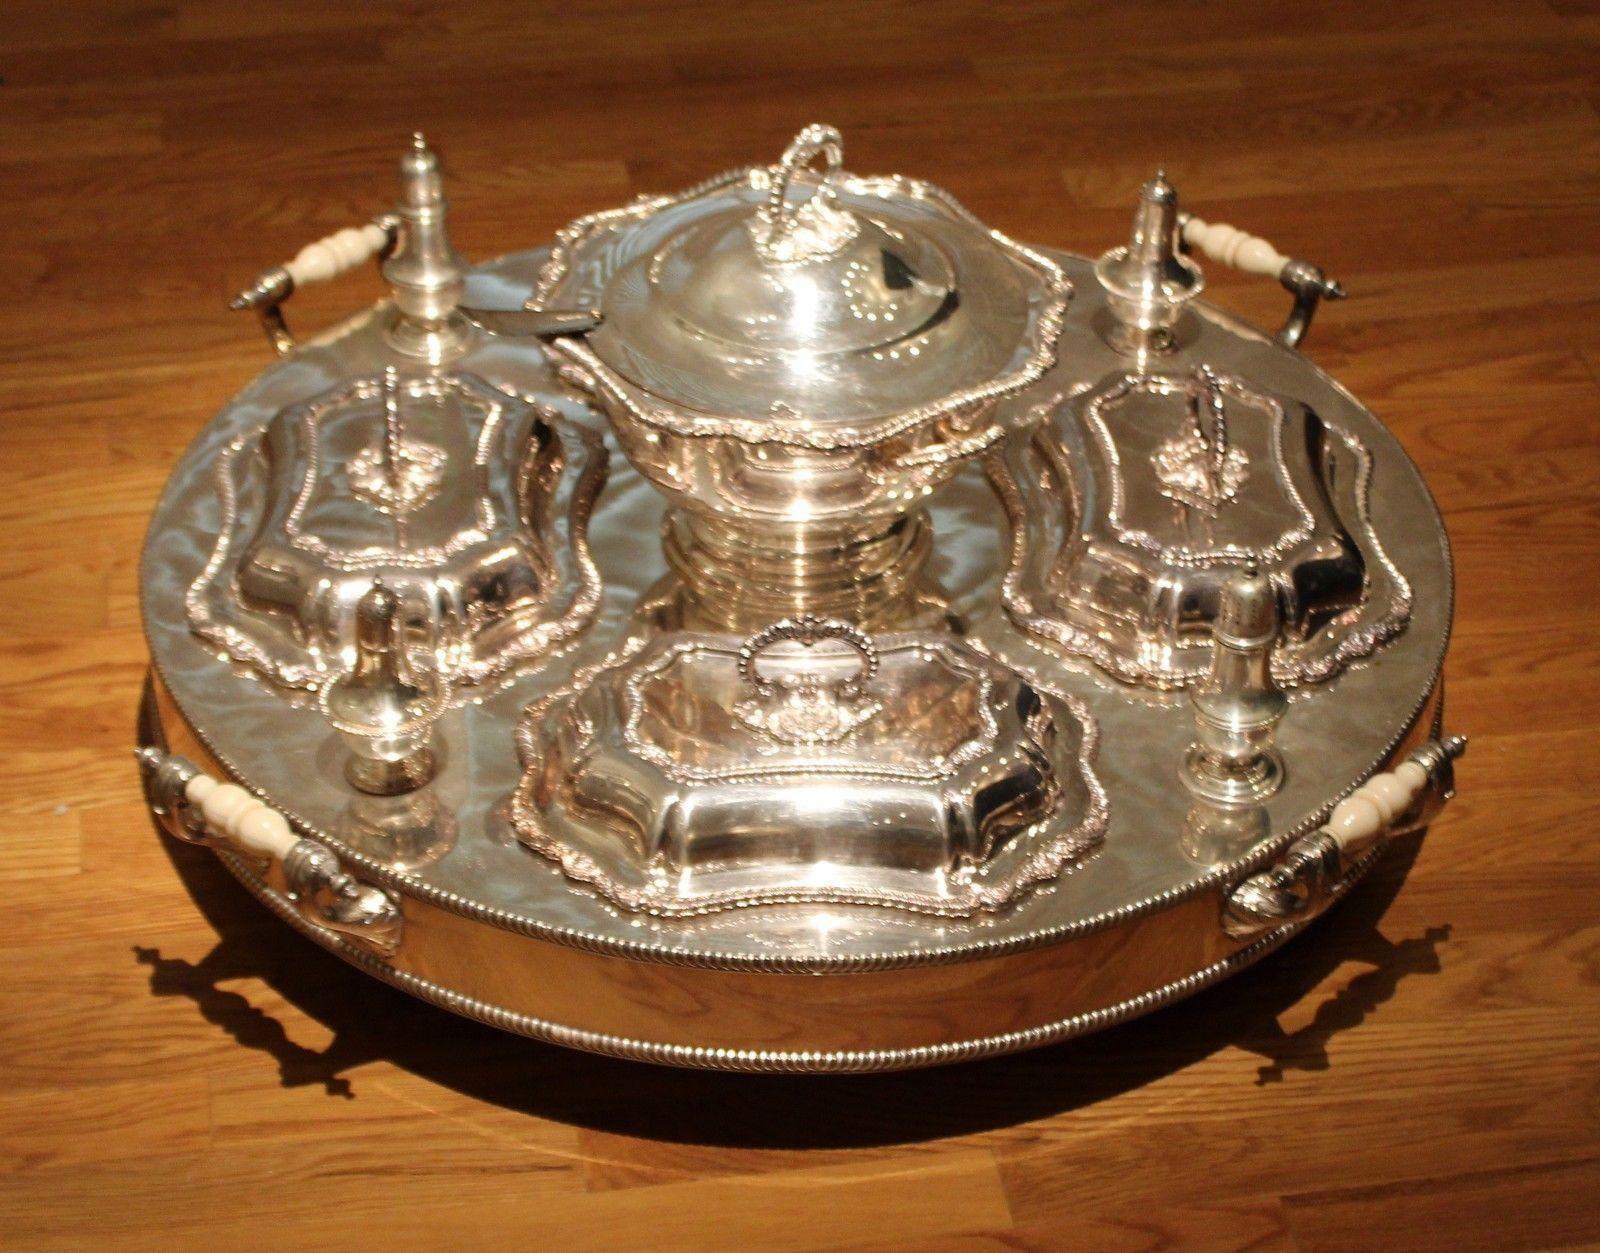 For your consideration is a magnificent, silver plated Lazy Susan platter piece, made in Sheffield England. In excellent condition. The dimensions are 32